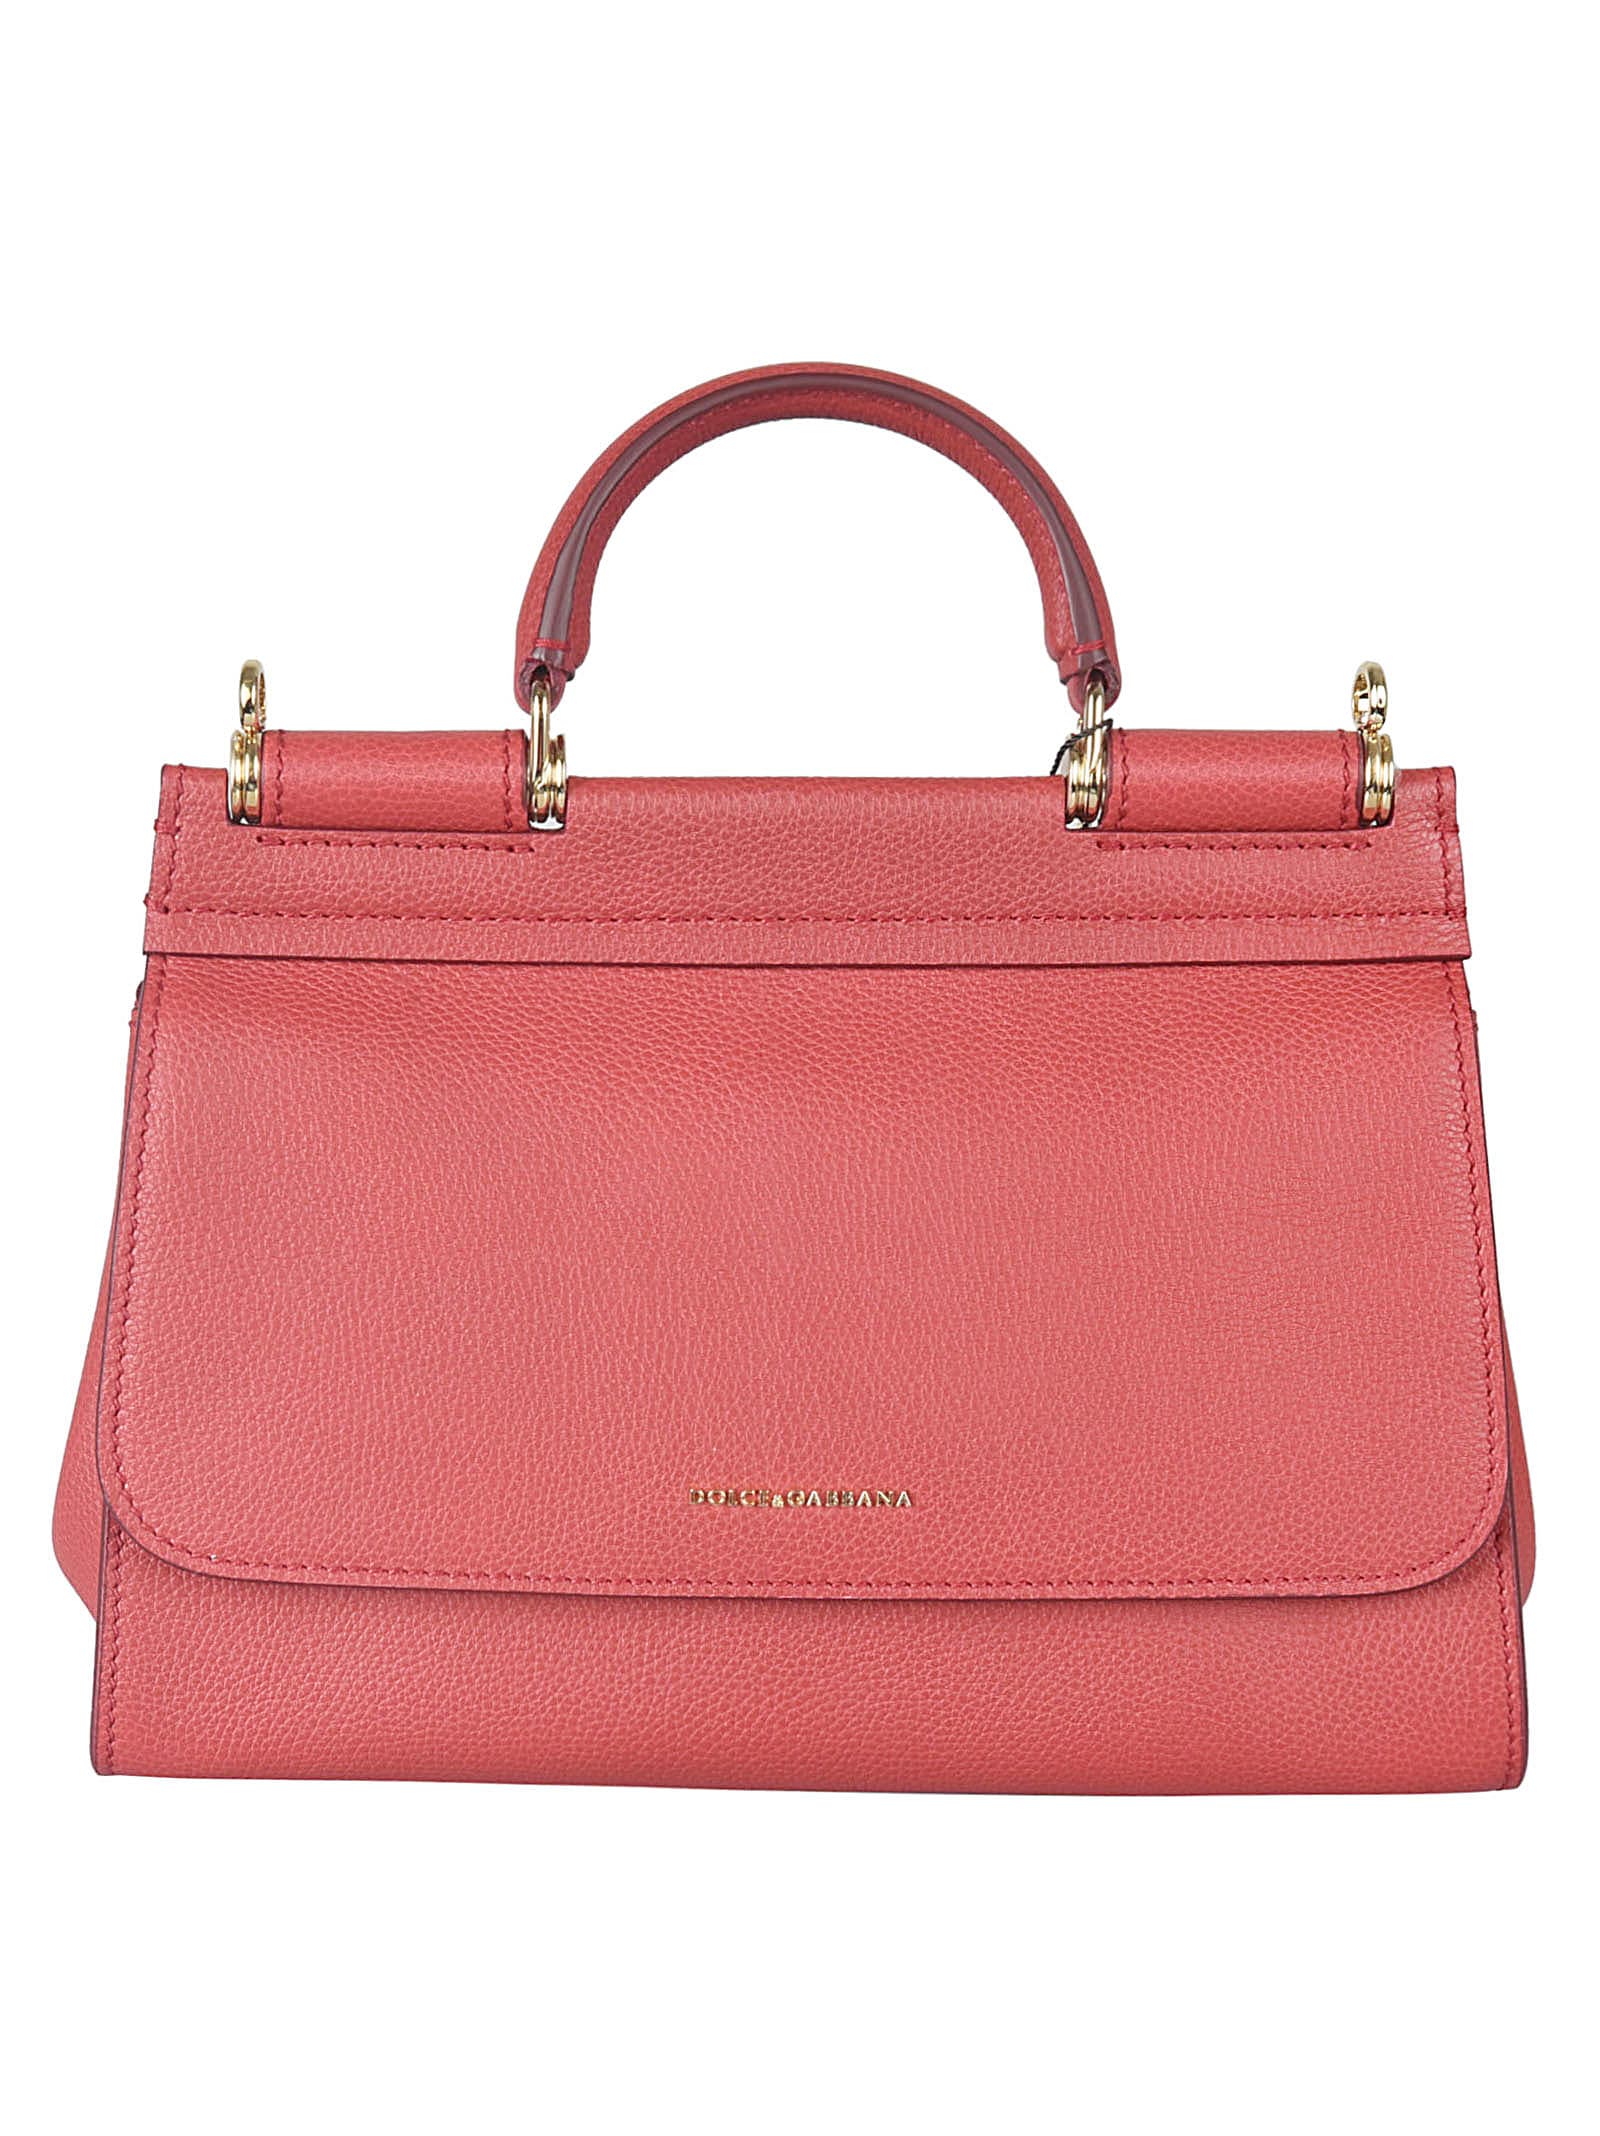 Dolce & Gabbana Flap Tote In Red